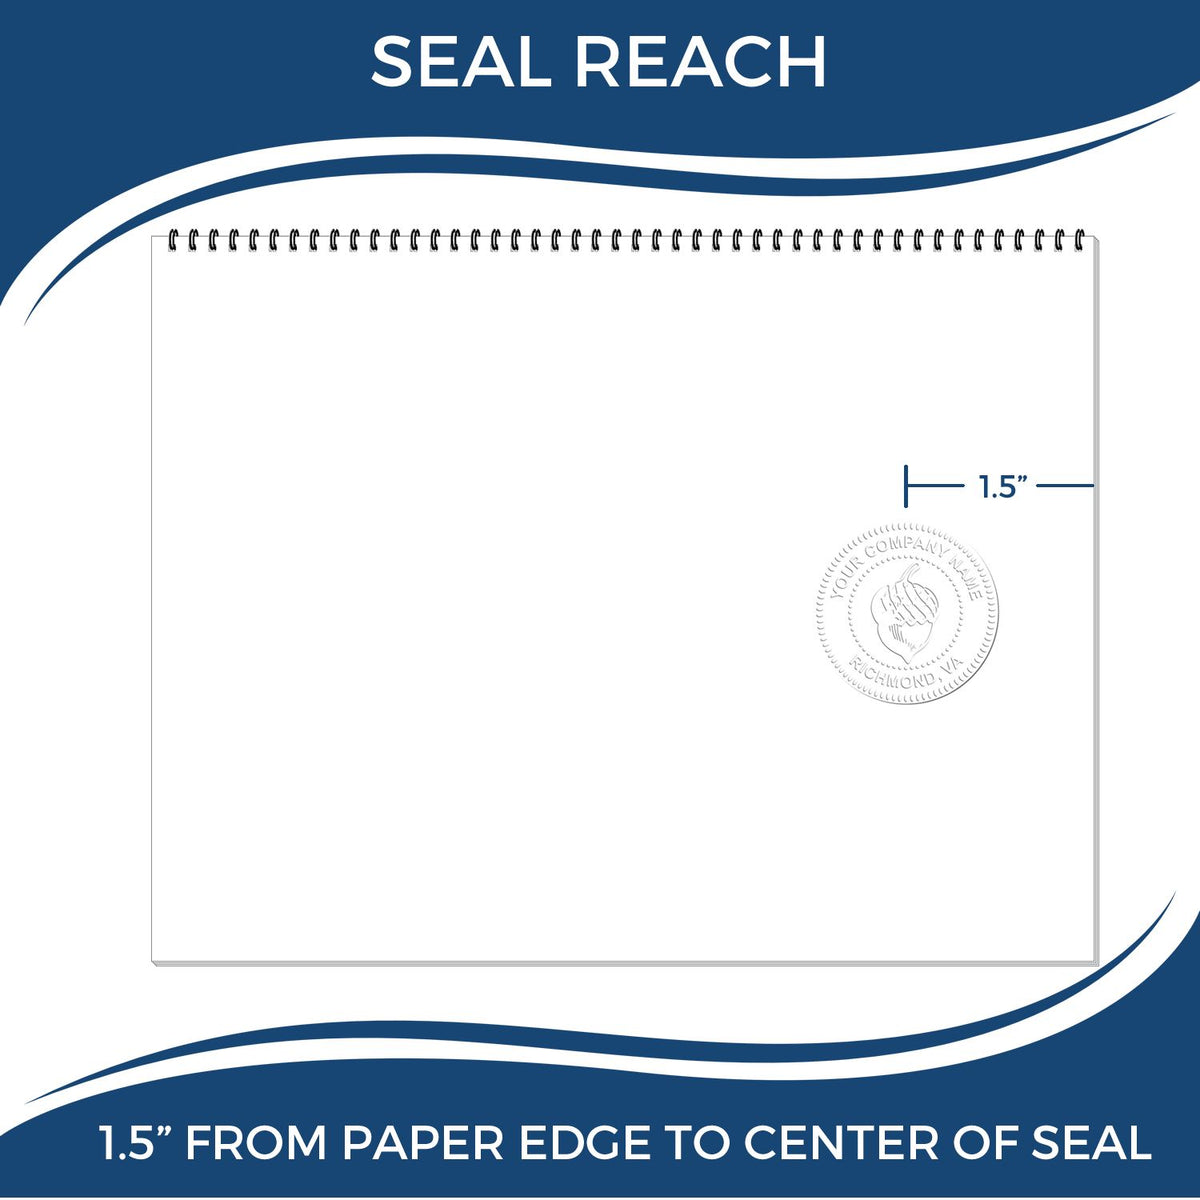 An infographic showing the seal reach which is represented by a ruler and a miniature seal image of the Idaho Desk Architect Embossing Seal